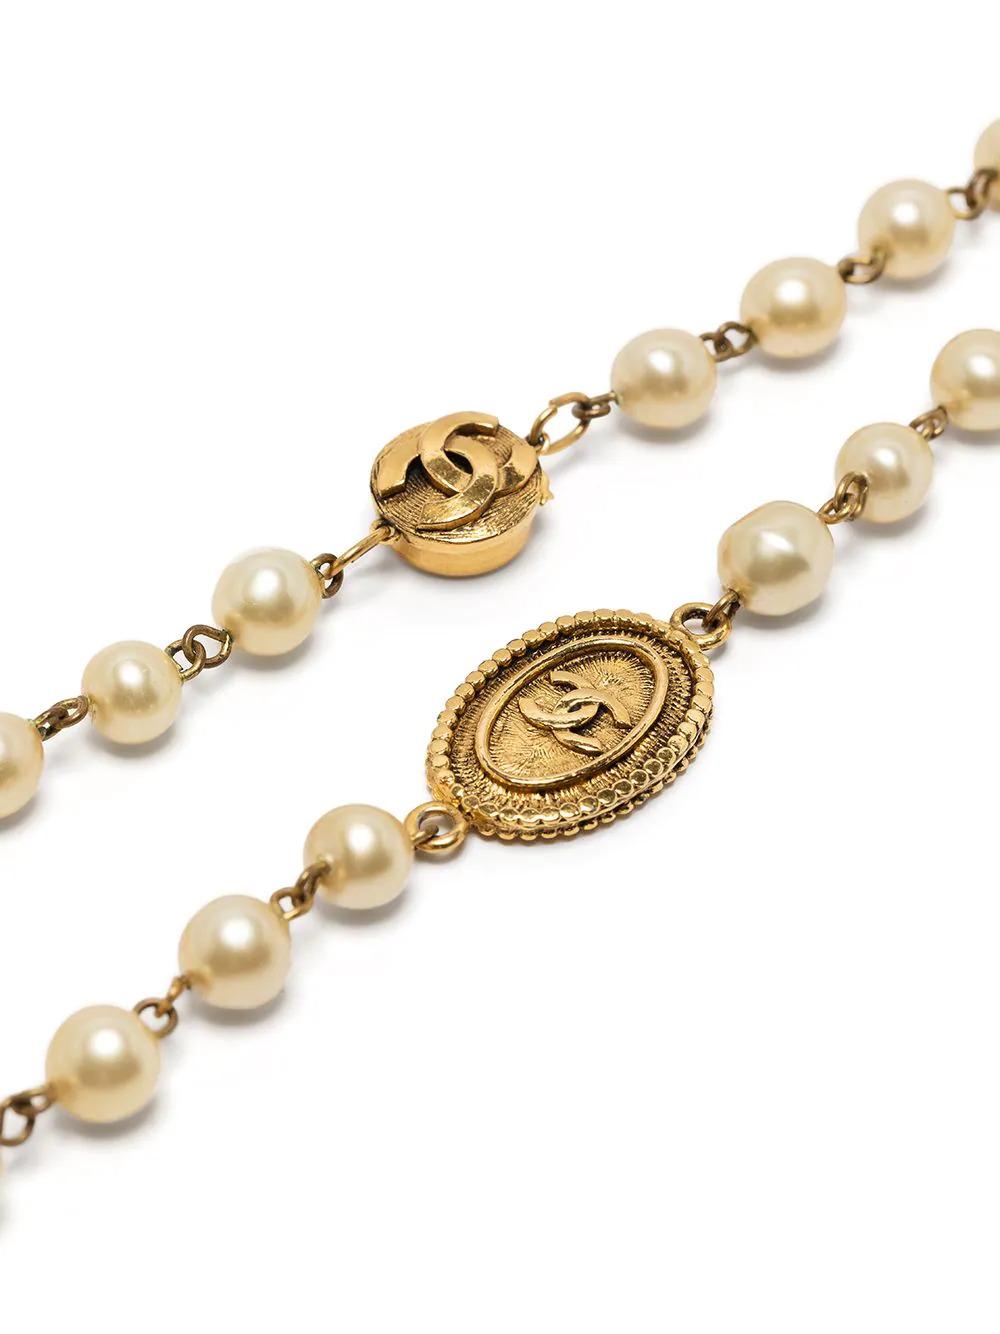 Crafted from antique gold-toned metal hardware, this elegant pre-owned necklace from Chanel is a unique piece that adds a touch of classic sophistication to any outfit with large-sized faux-pearl embellishments and gold-plated metal signature